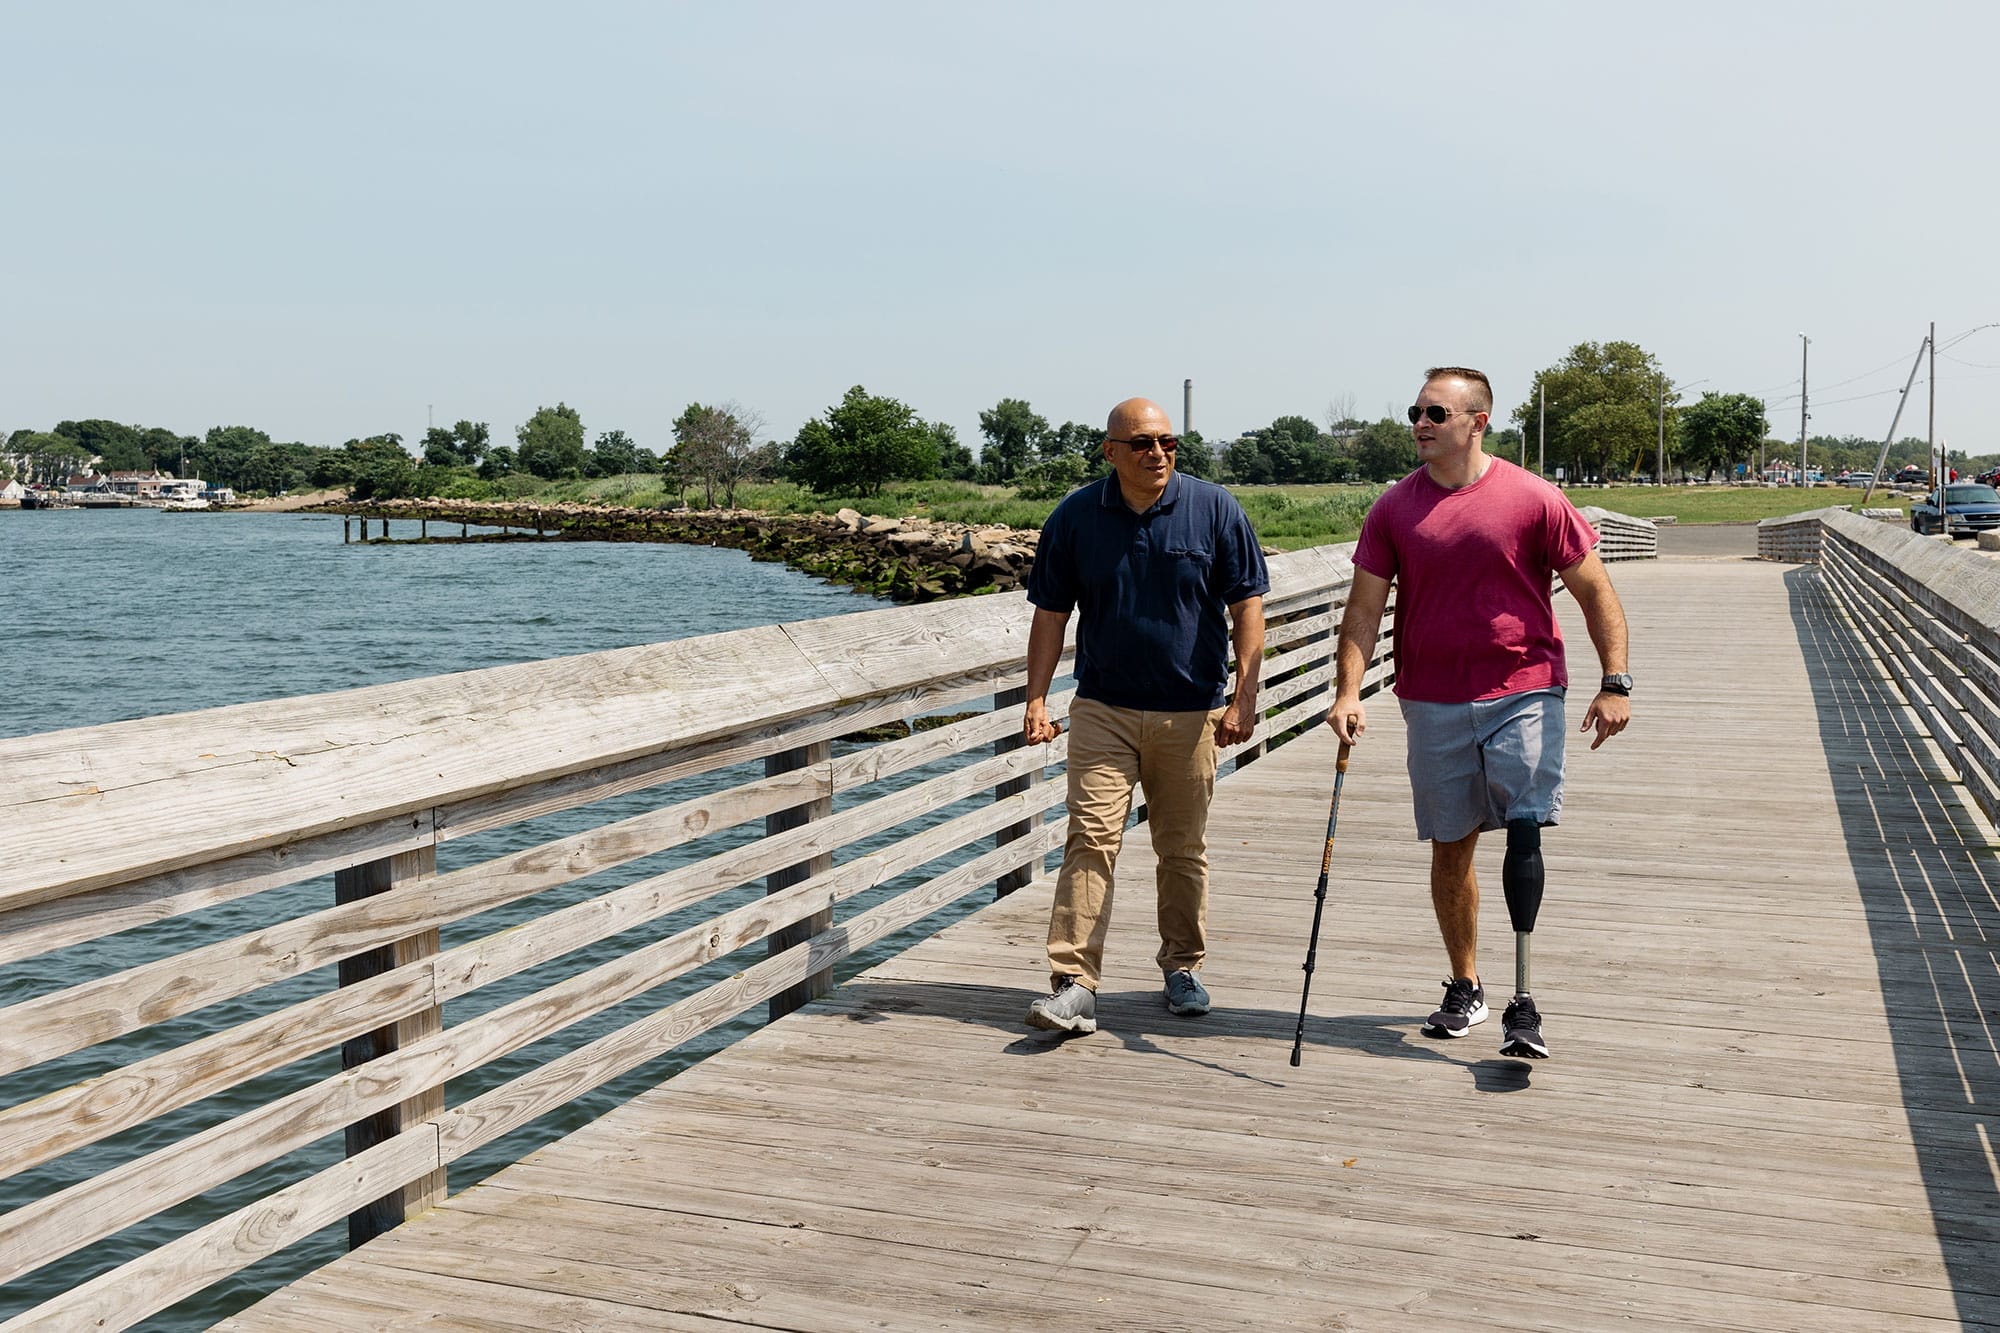 Mariano Rodriguez (left) and Collin McSpirit stroll on the boardwalk in Bridgeport, Connecticut’s Seaside Park. At a time when Americans expressfeelings of loneliness, isolation, and disconnection from neighbors, shared public spaces are important in helping people form and maintain relationships. Photo: Kristyn Miller